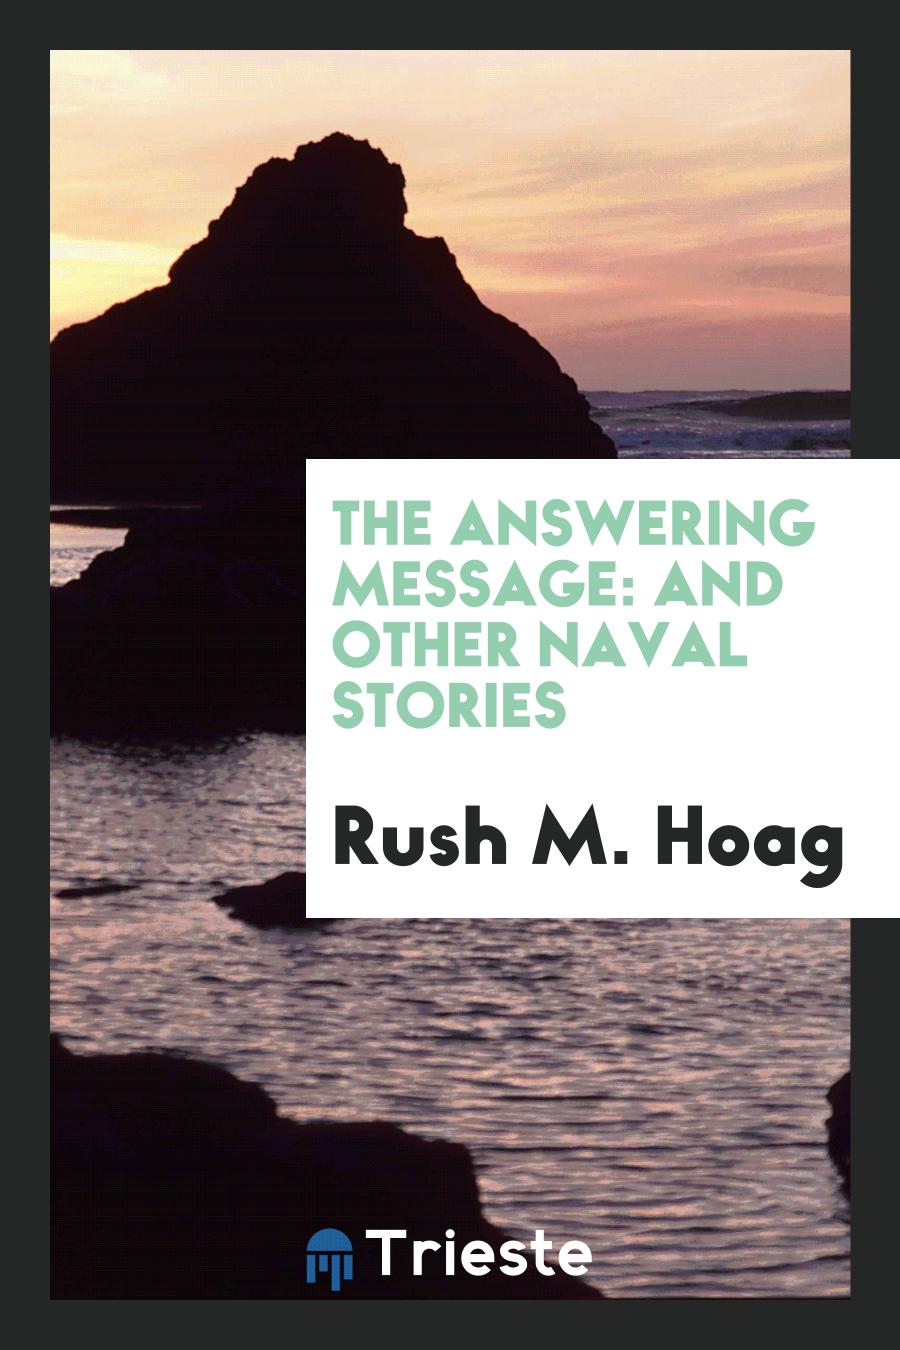 The Answering Message: And Other Naval Stories